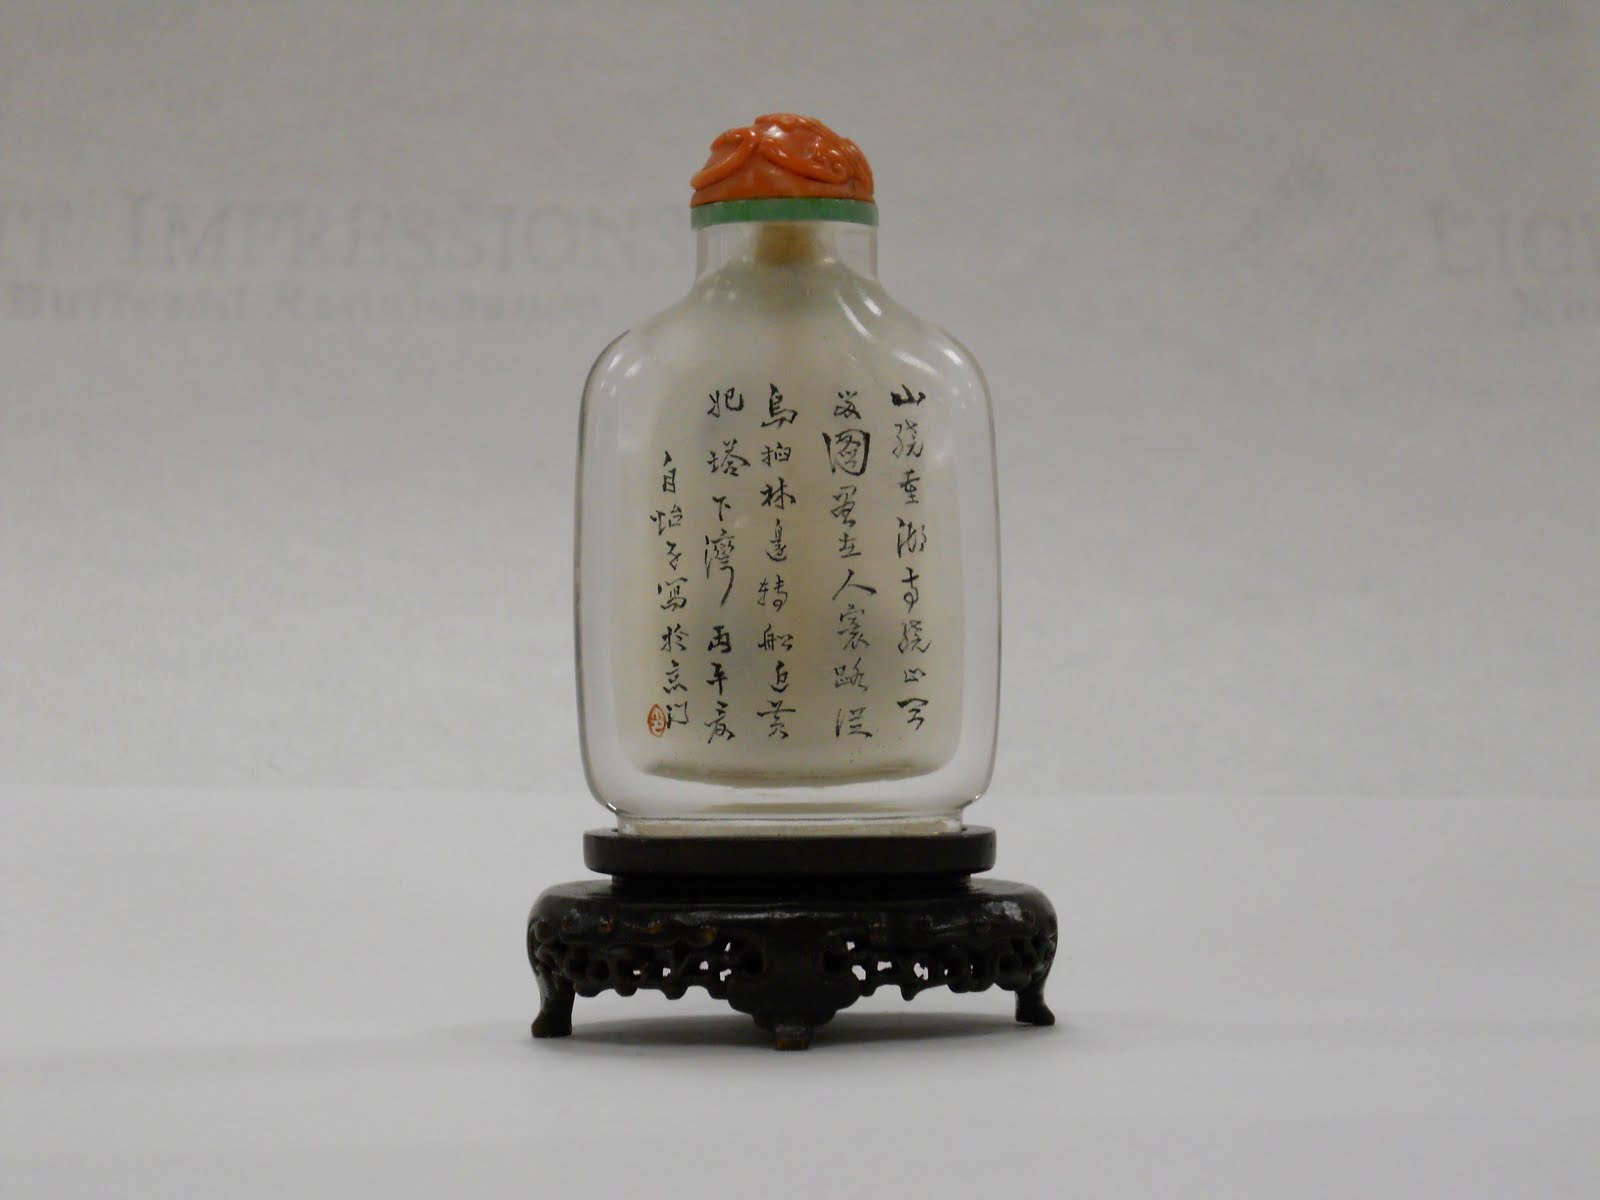 Reverse side of snuff bottle with man in round hat. This side has Chinese lettering.